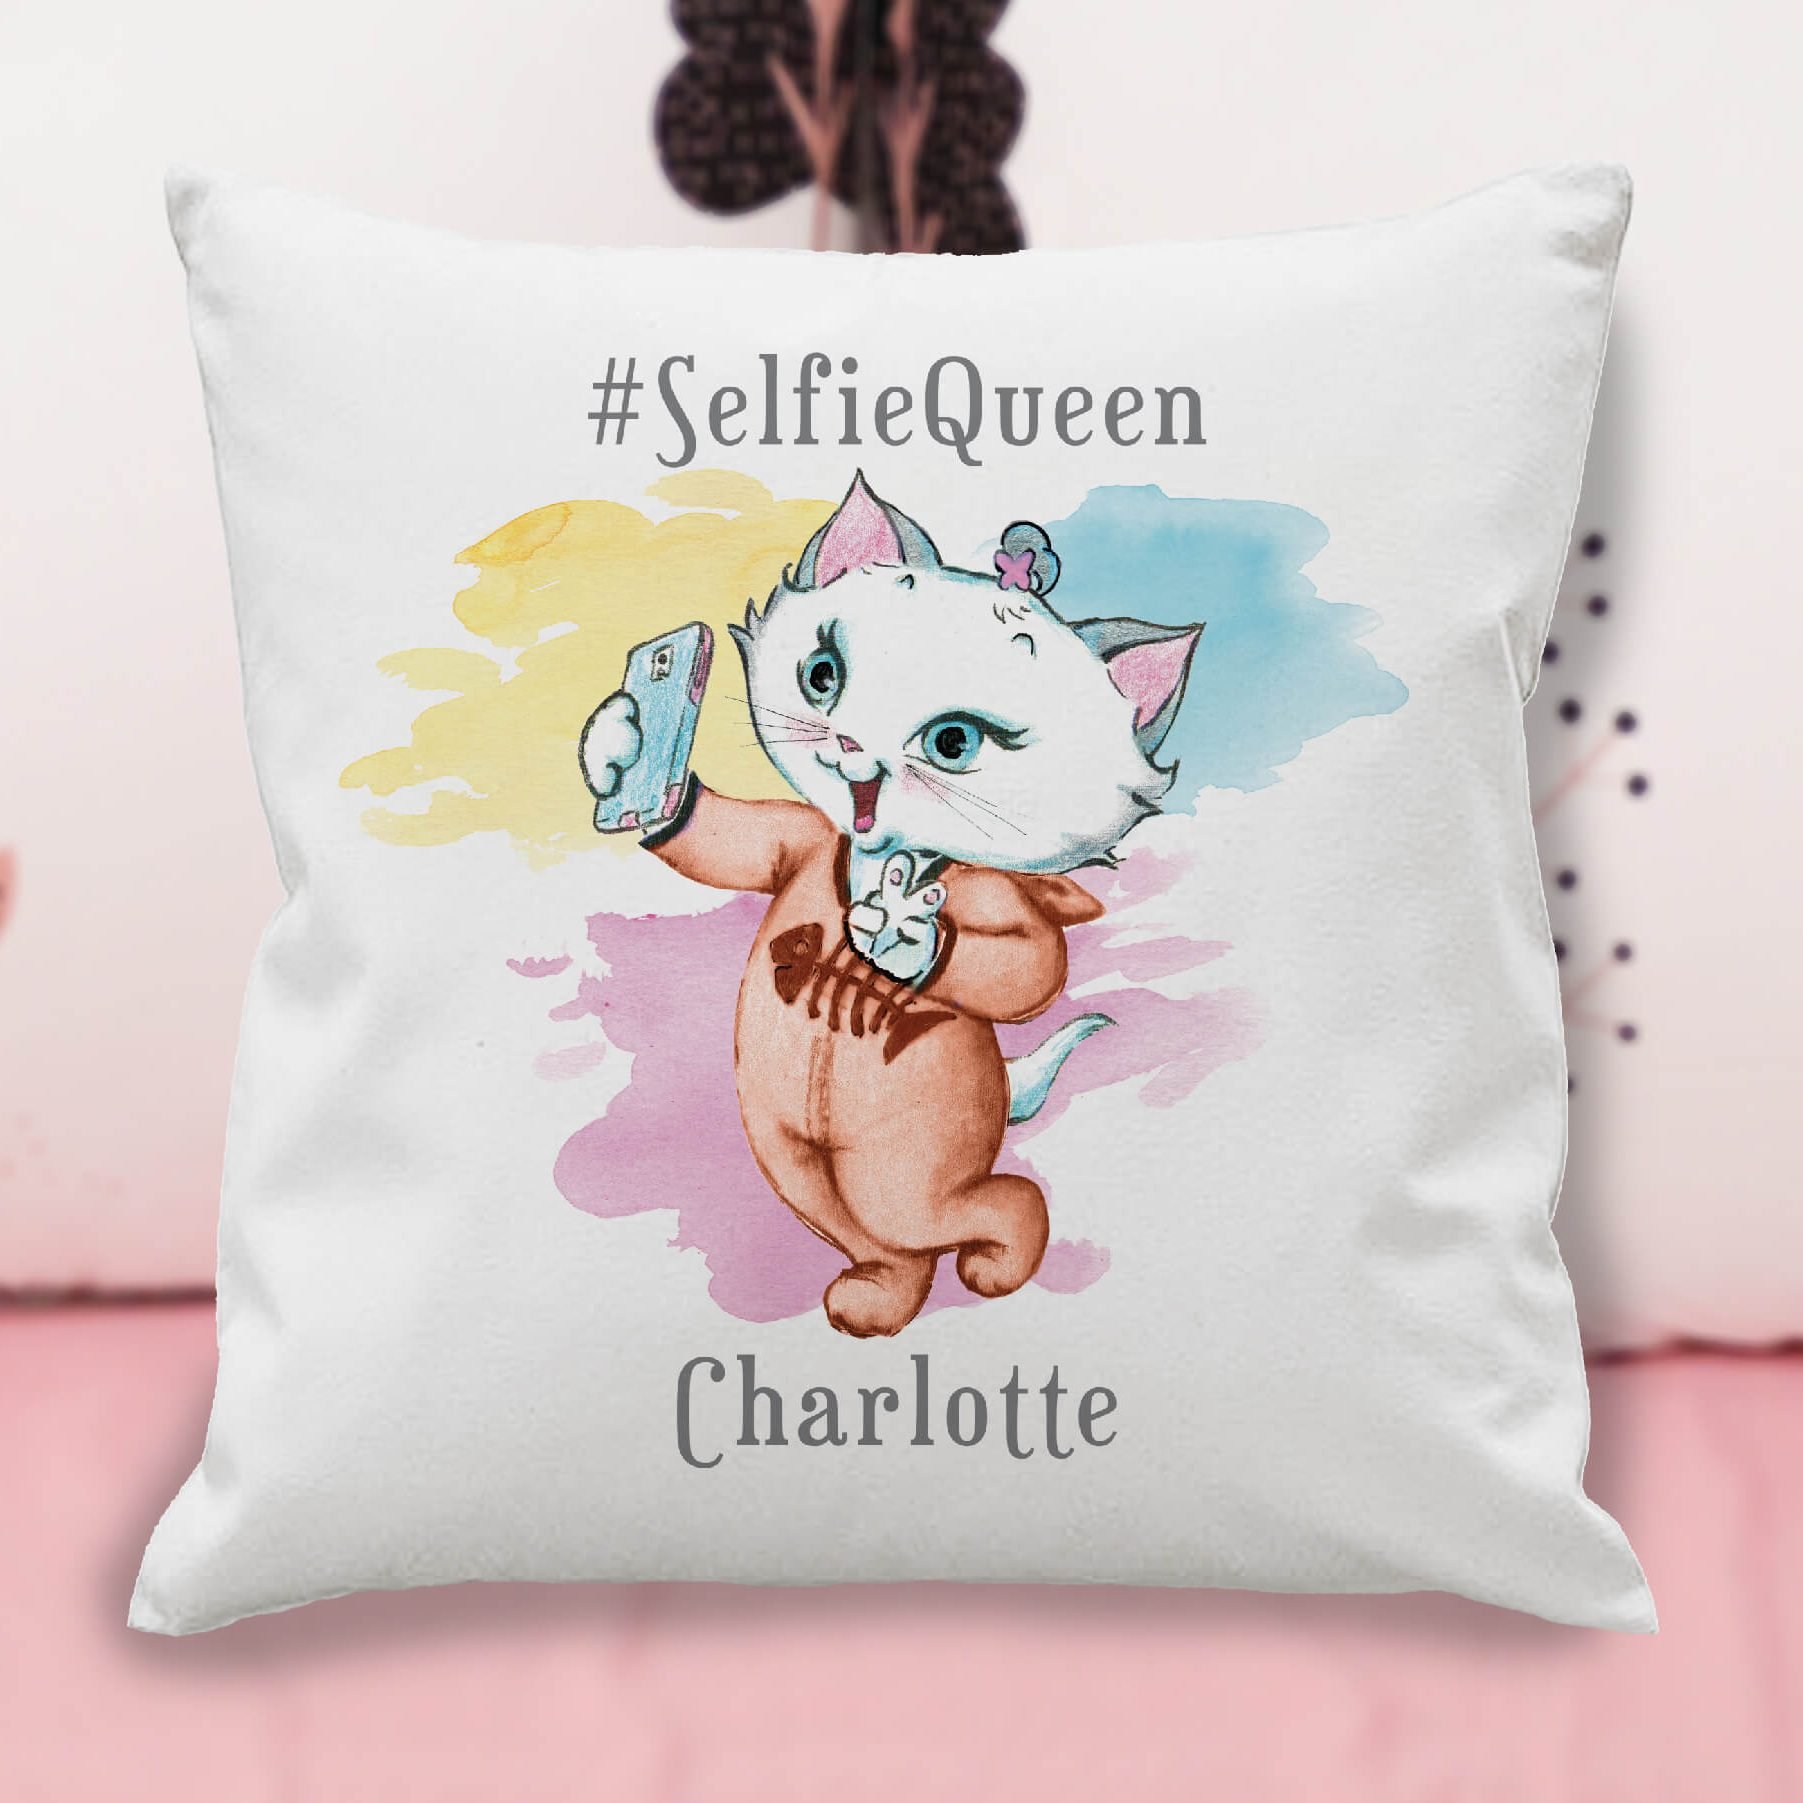 Personalised Nina Selfie Queen Cushion Cover